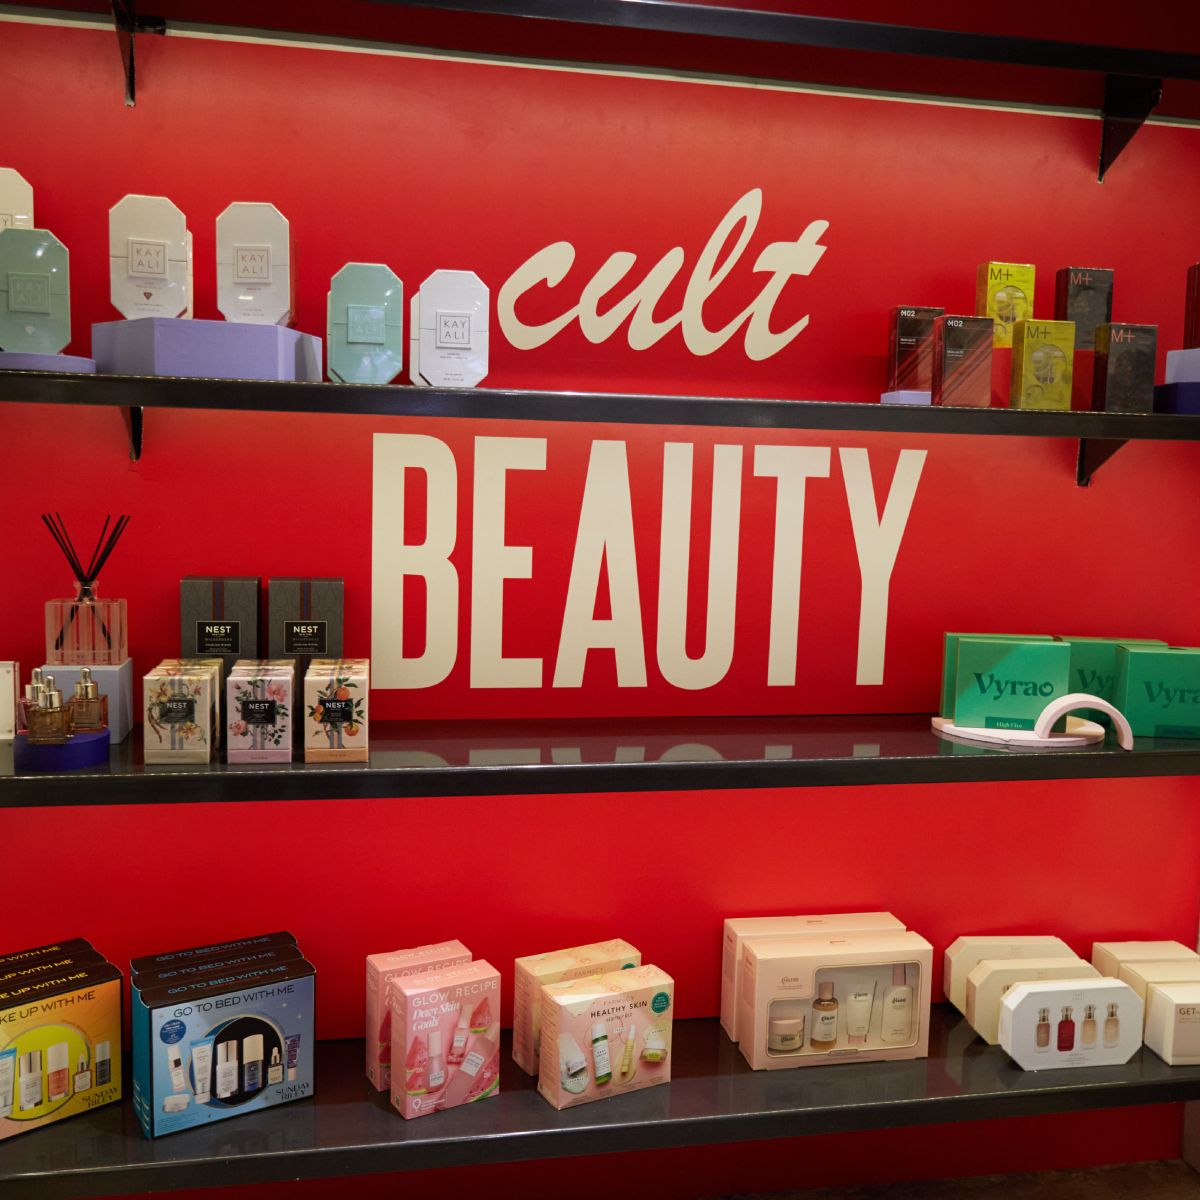 Coggles x Cult Beauty event